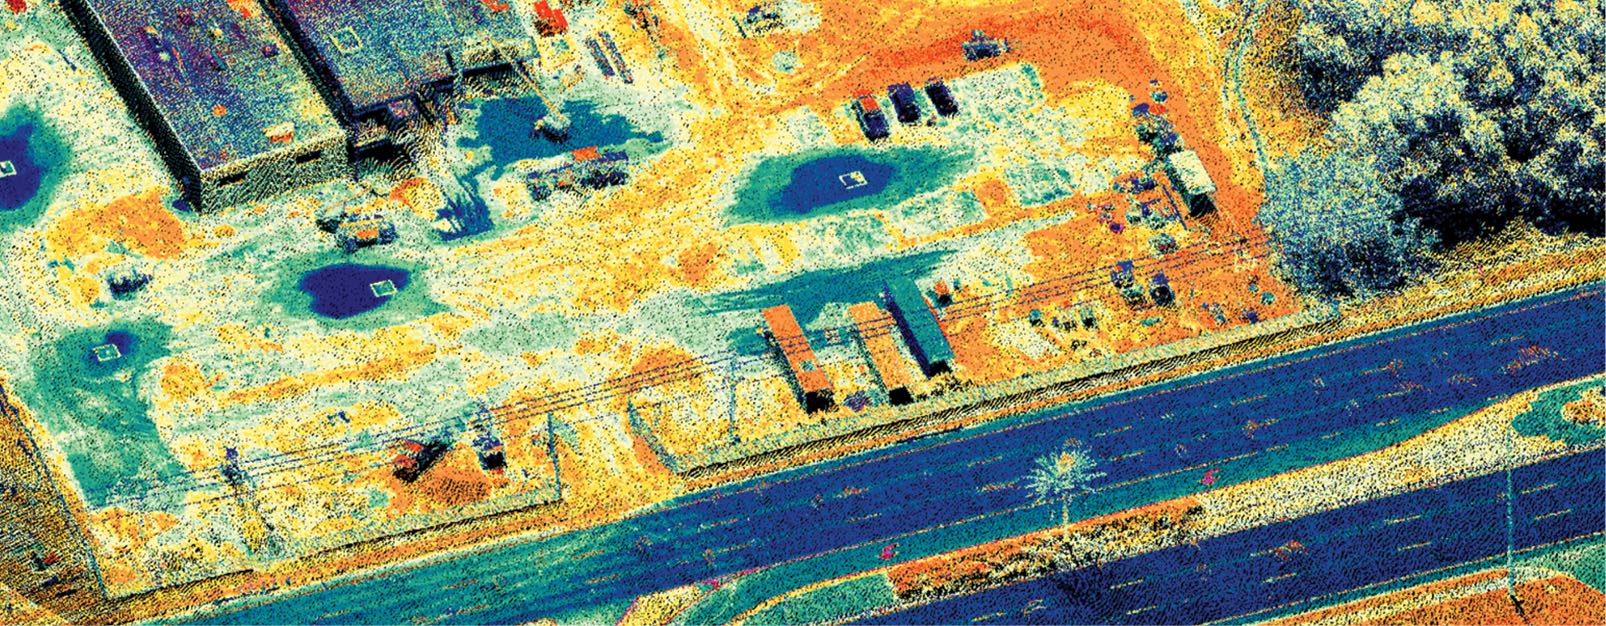 Moving Forward with LiDAR – Inside Unmanned Systems